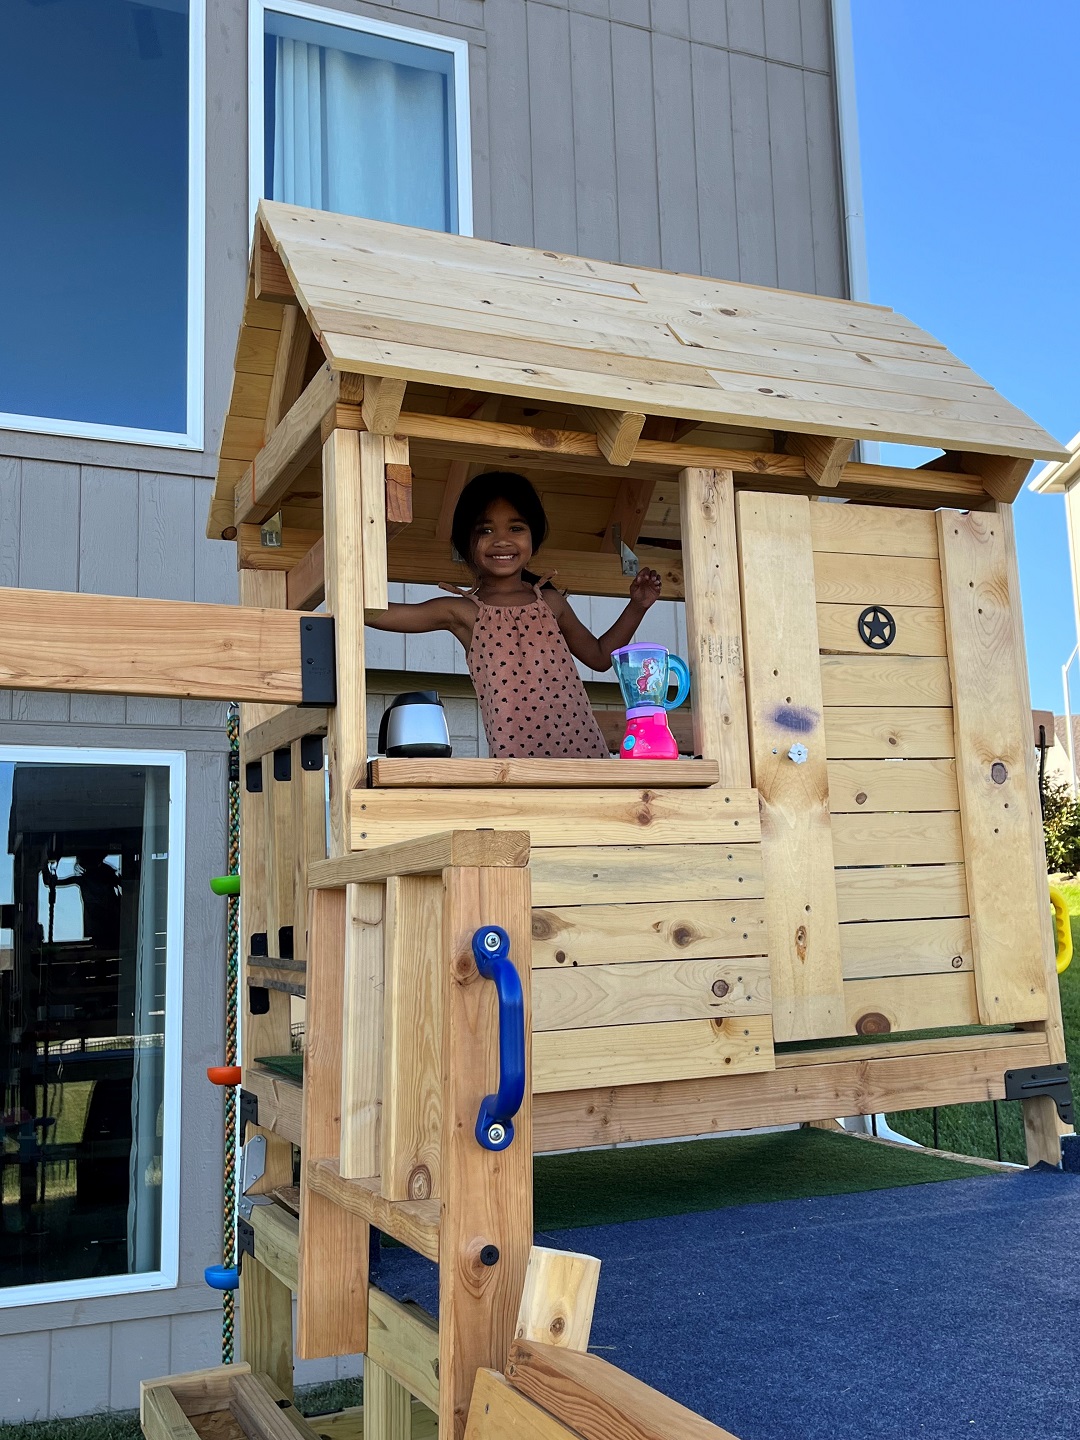 Nehal's daughter enjoying the completed playhouse